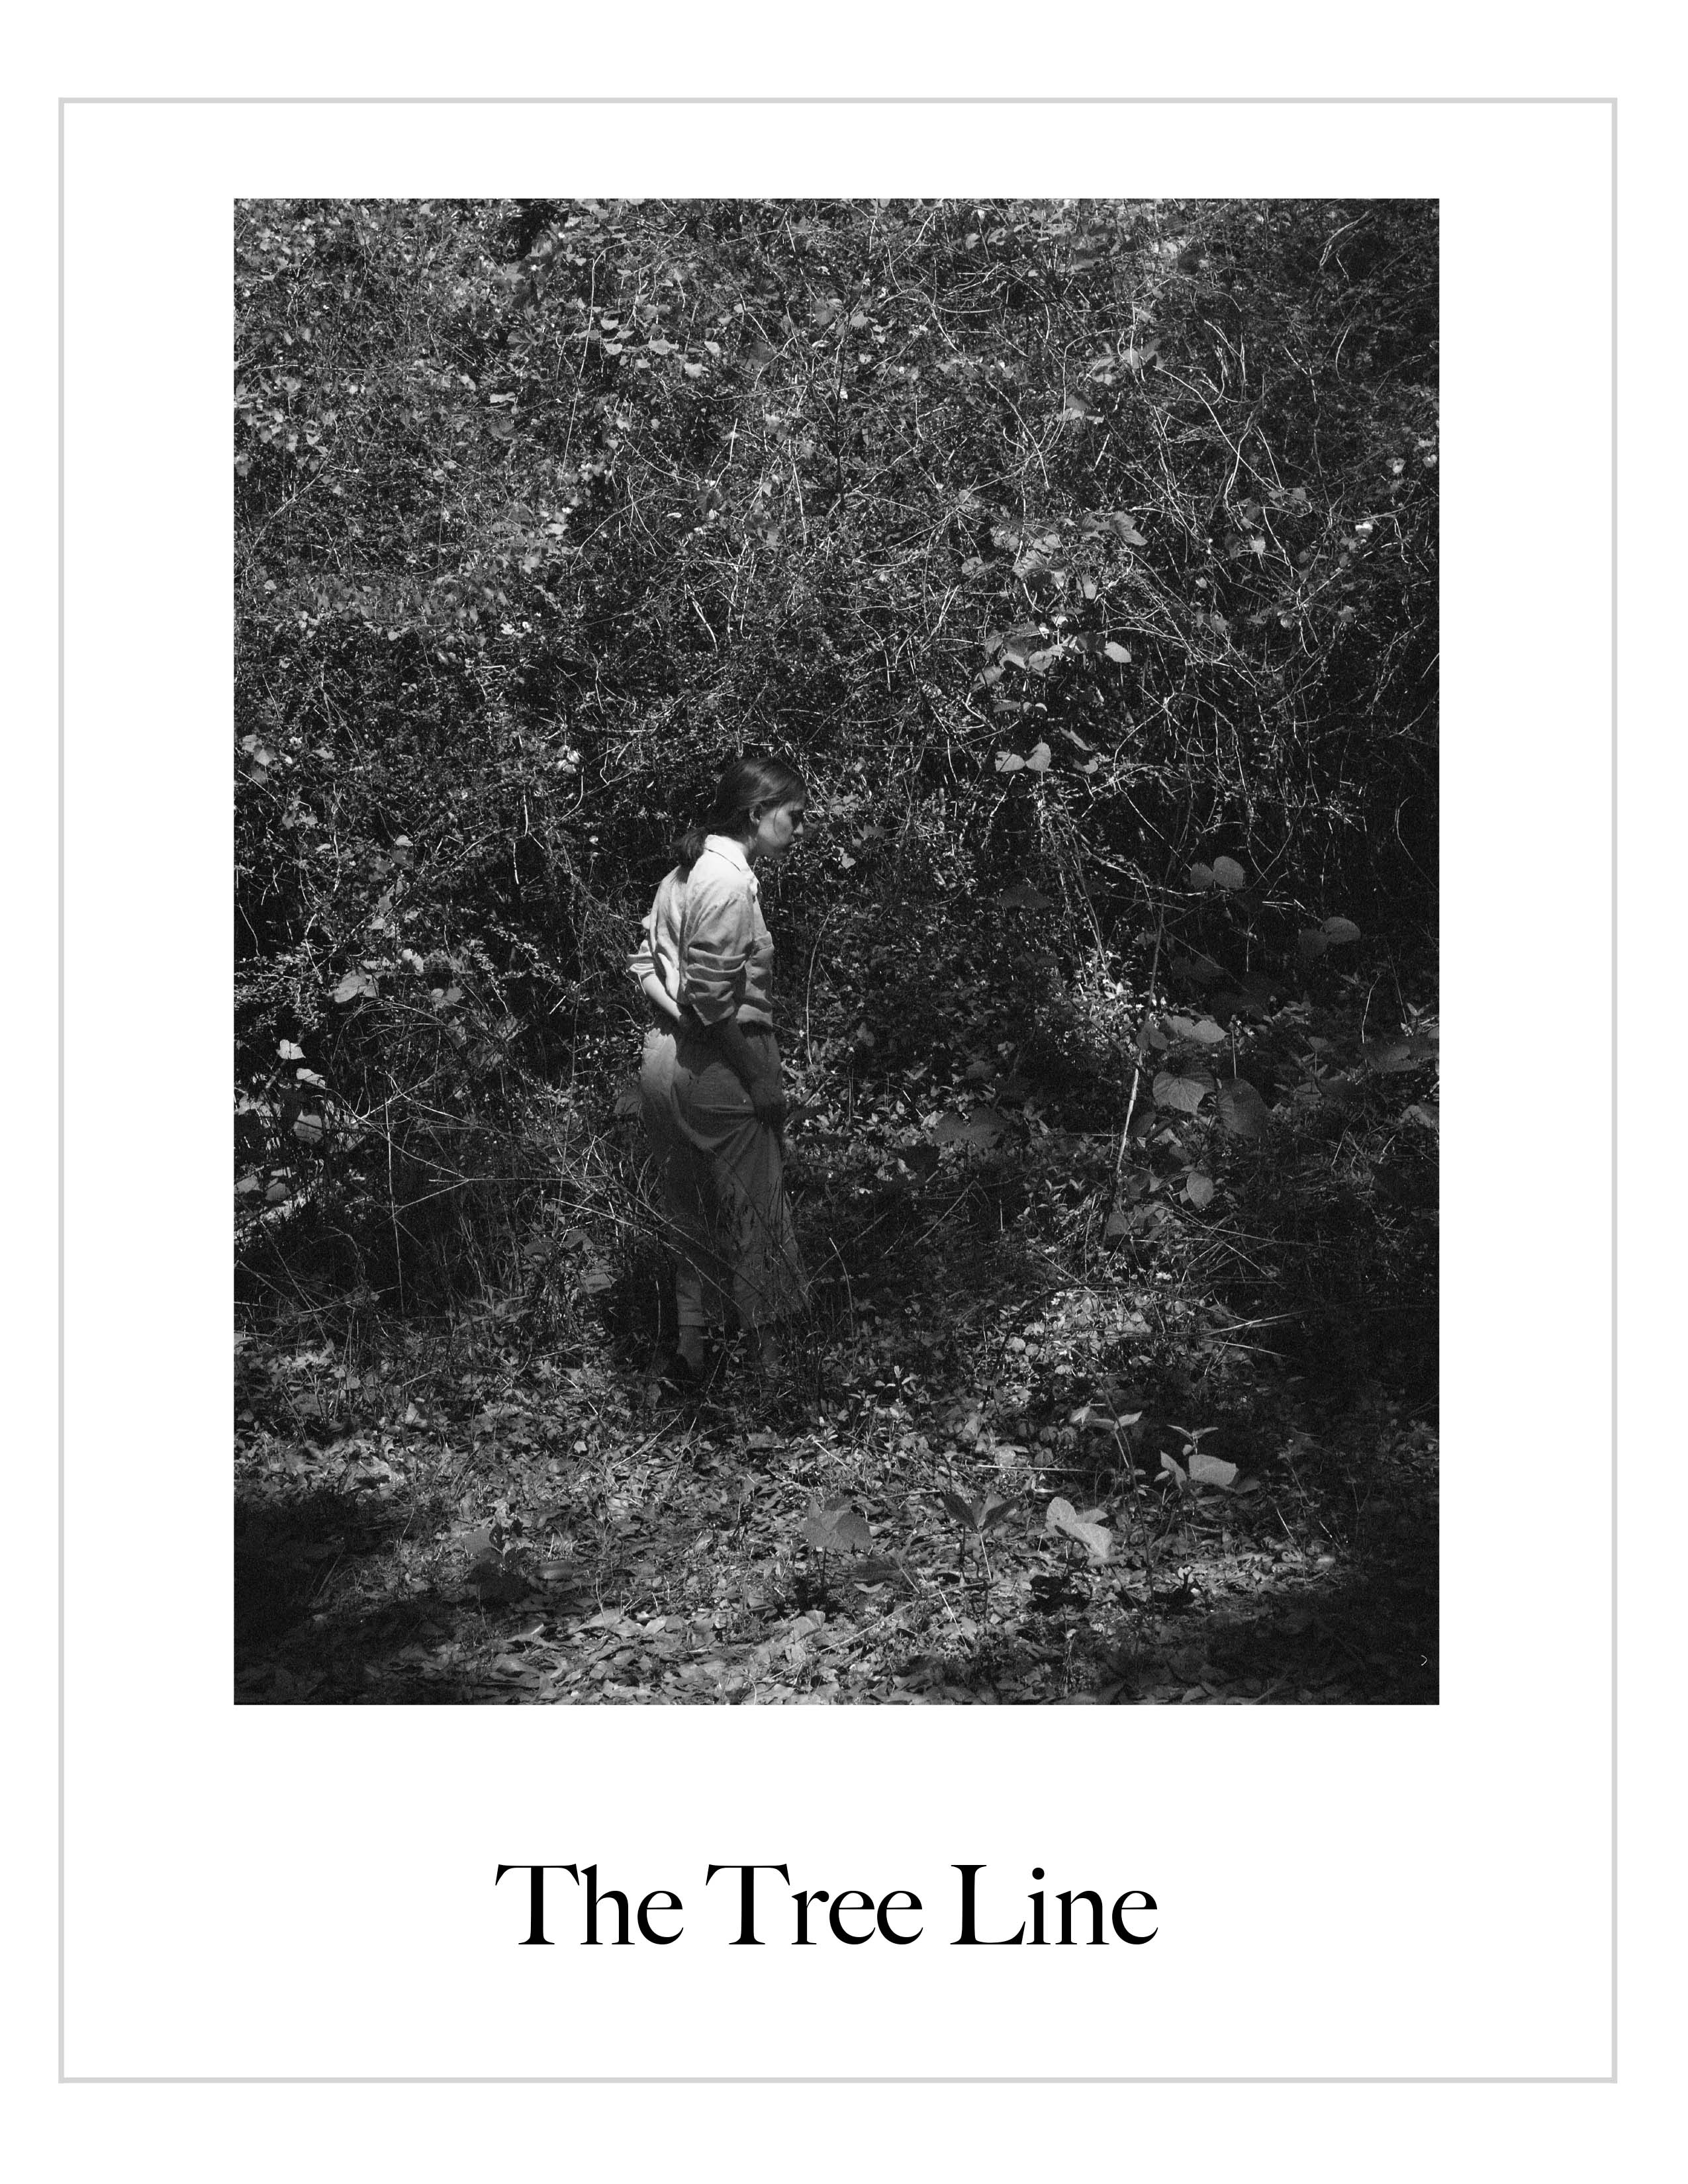 Showcase Image for The Tree Line